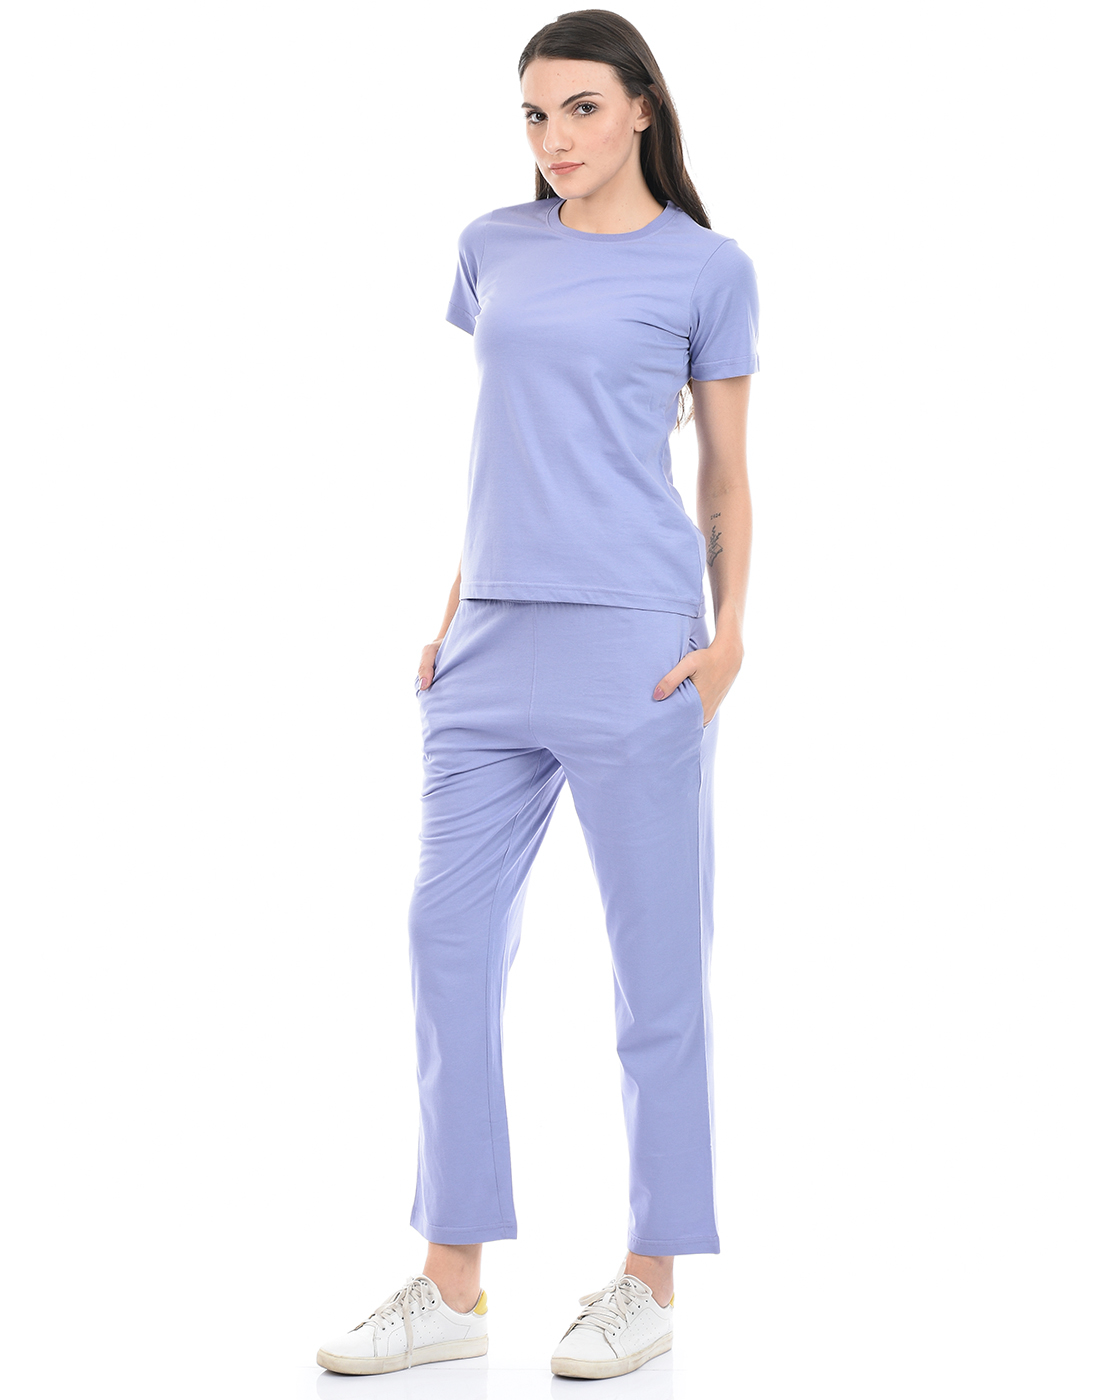 ONEWAY Round Neck Half Sleeves Solid Night Suit for Women|100% Cotton|Comfort Fit|Women's Comfortable PJ'S|Night Wear